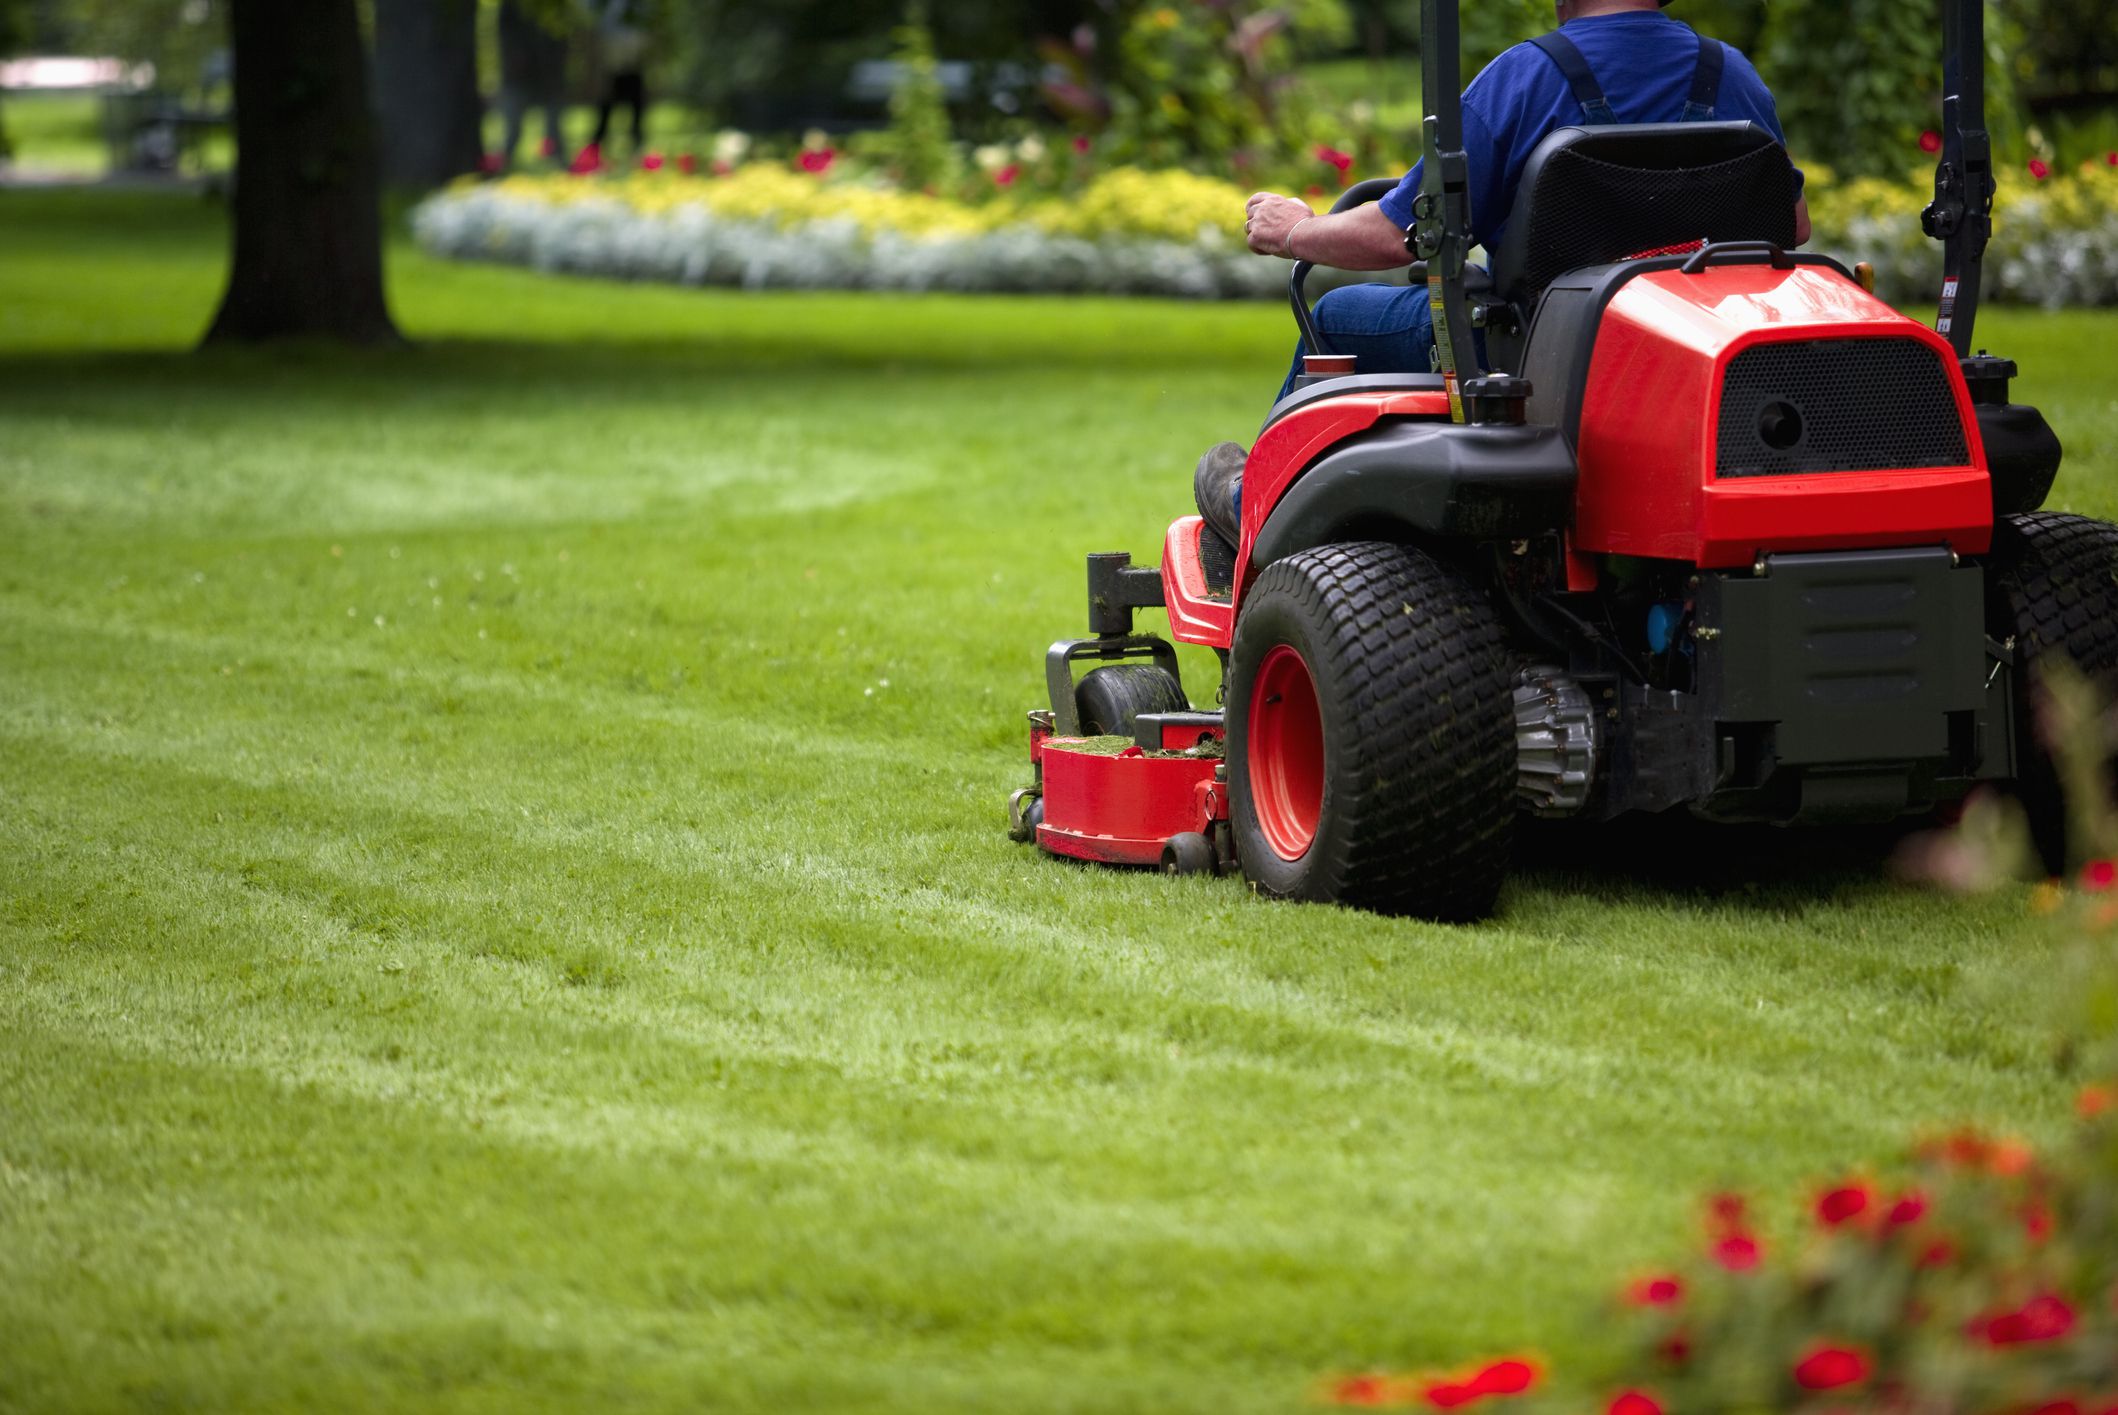 The Best Time to Buy a Lawn Mower